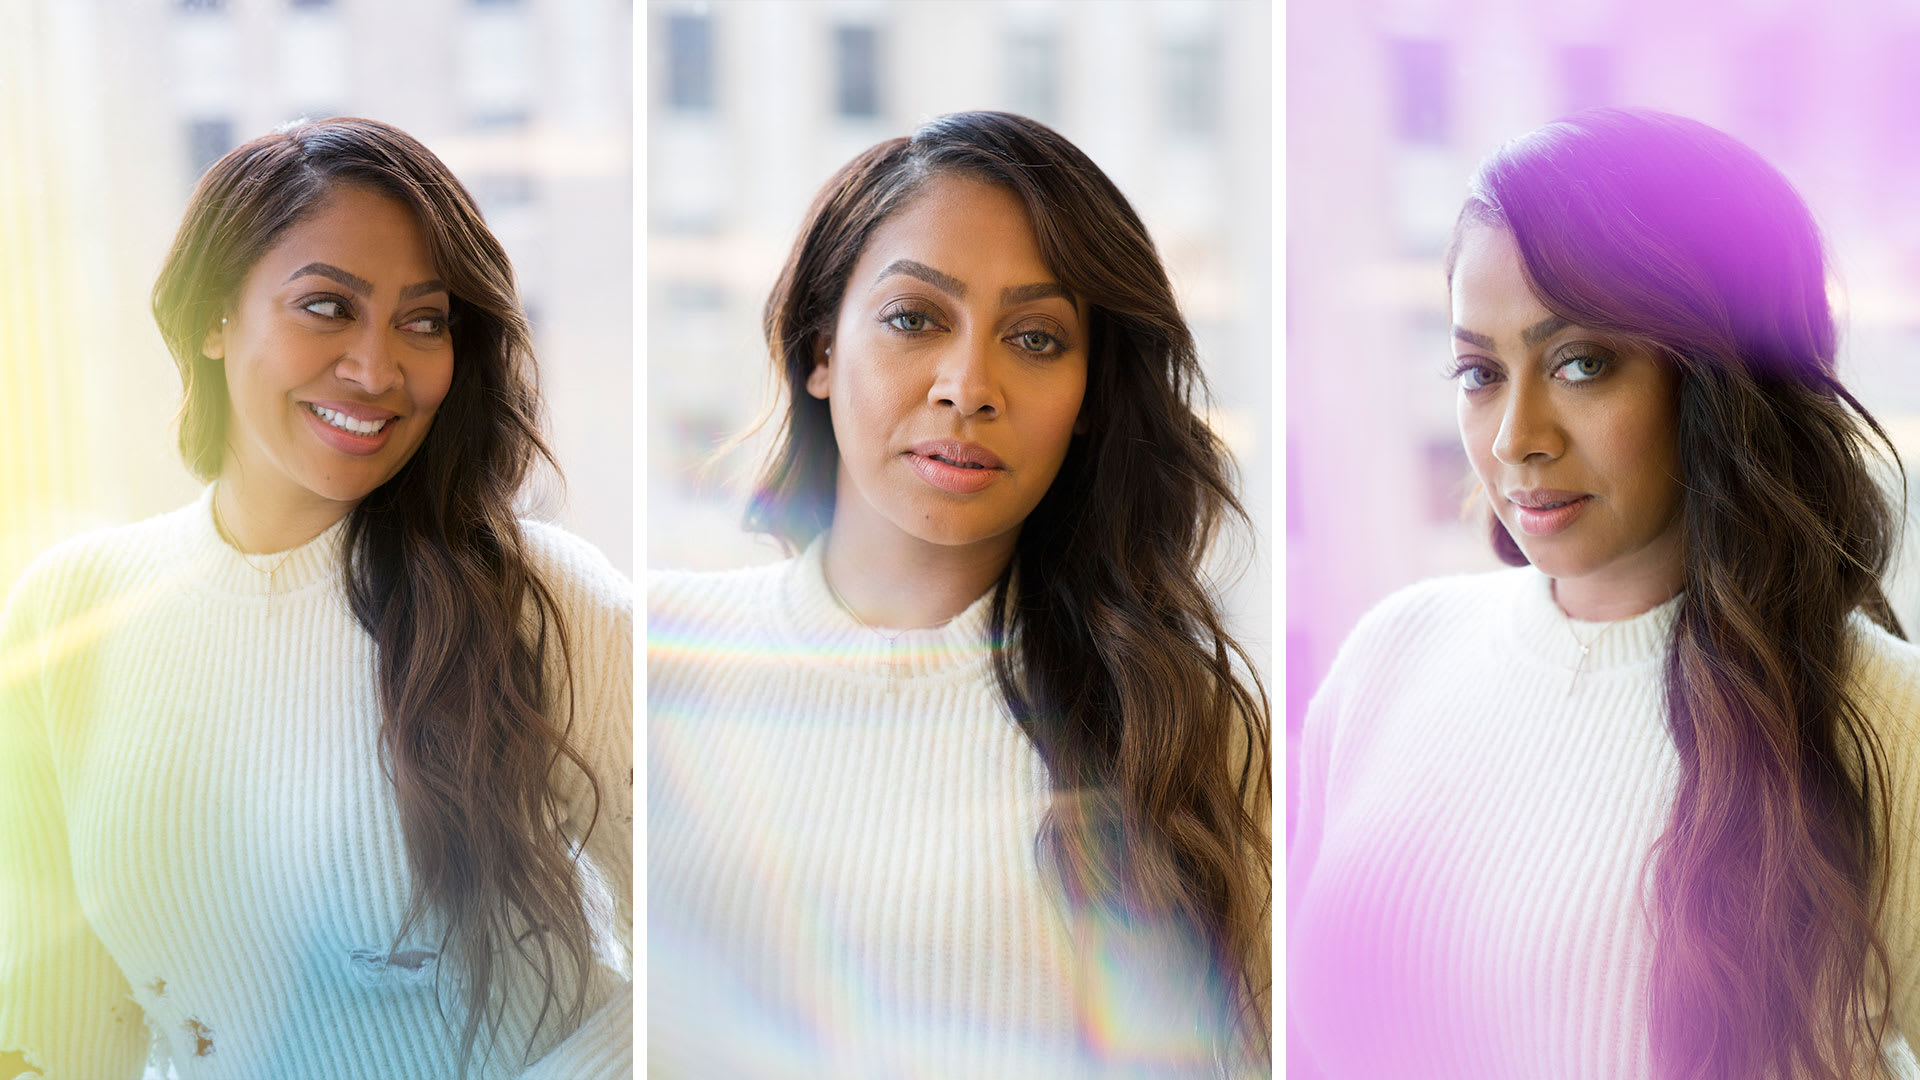 La La Anthony is ready to show you what she can do